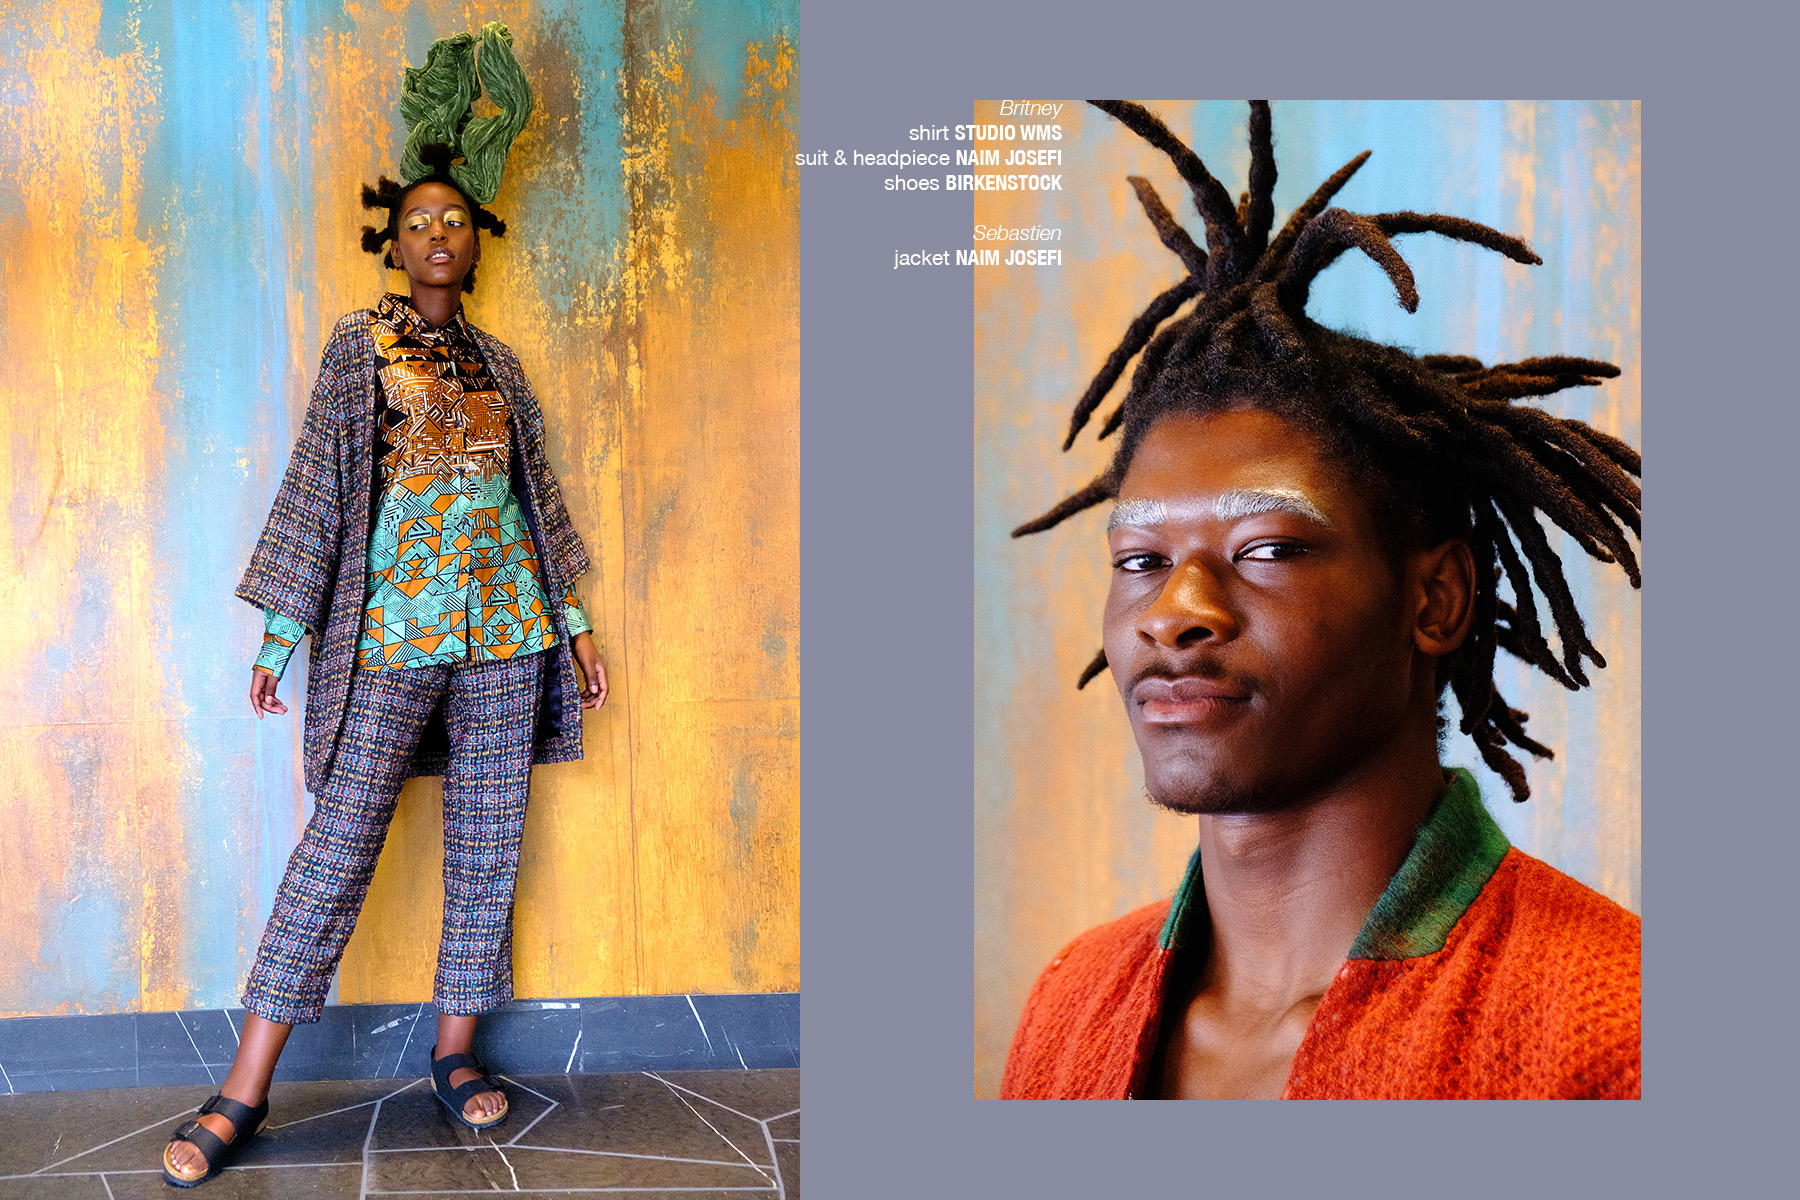 Krullmag. fashion story with 2 black models